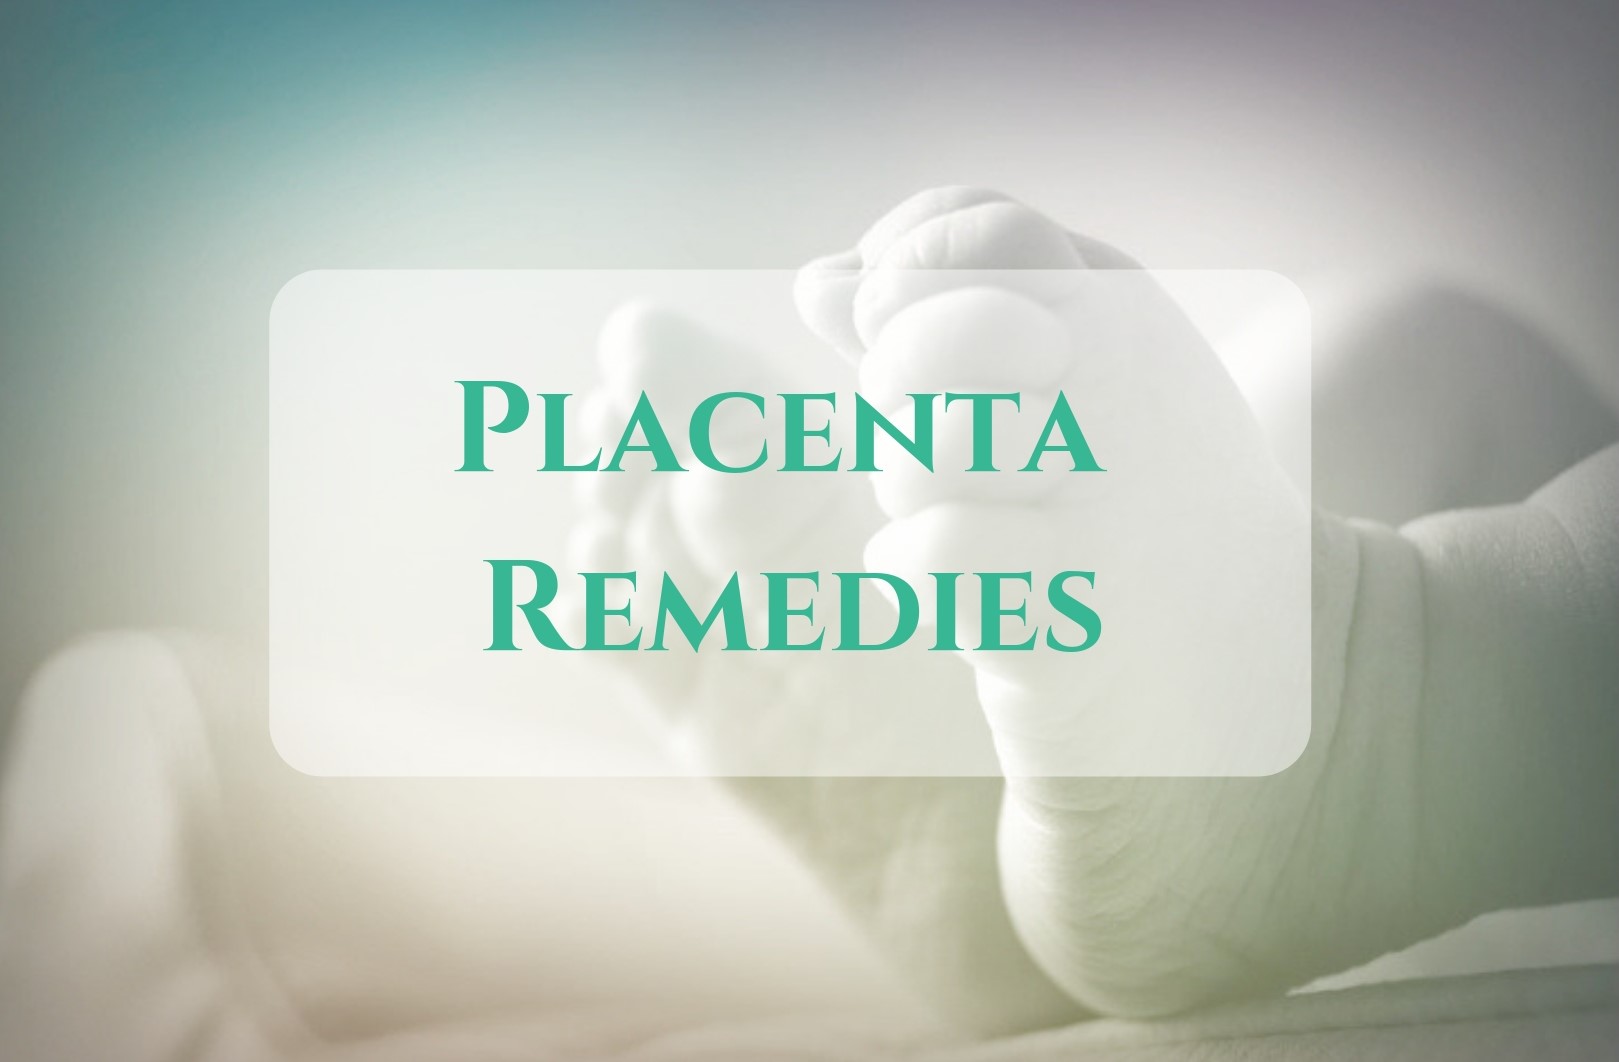 Placenta Remedies available with Mo Chuisle University Galway Hospital and Portiuncula Hospital